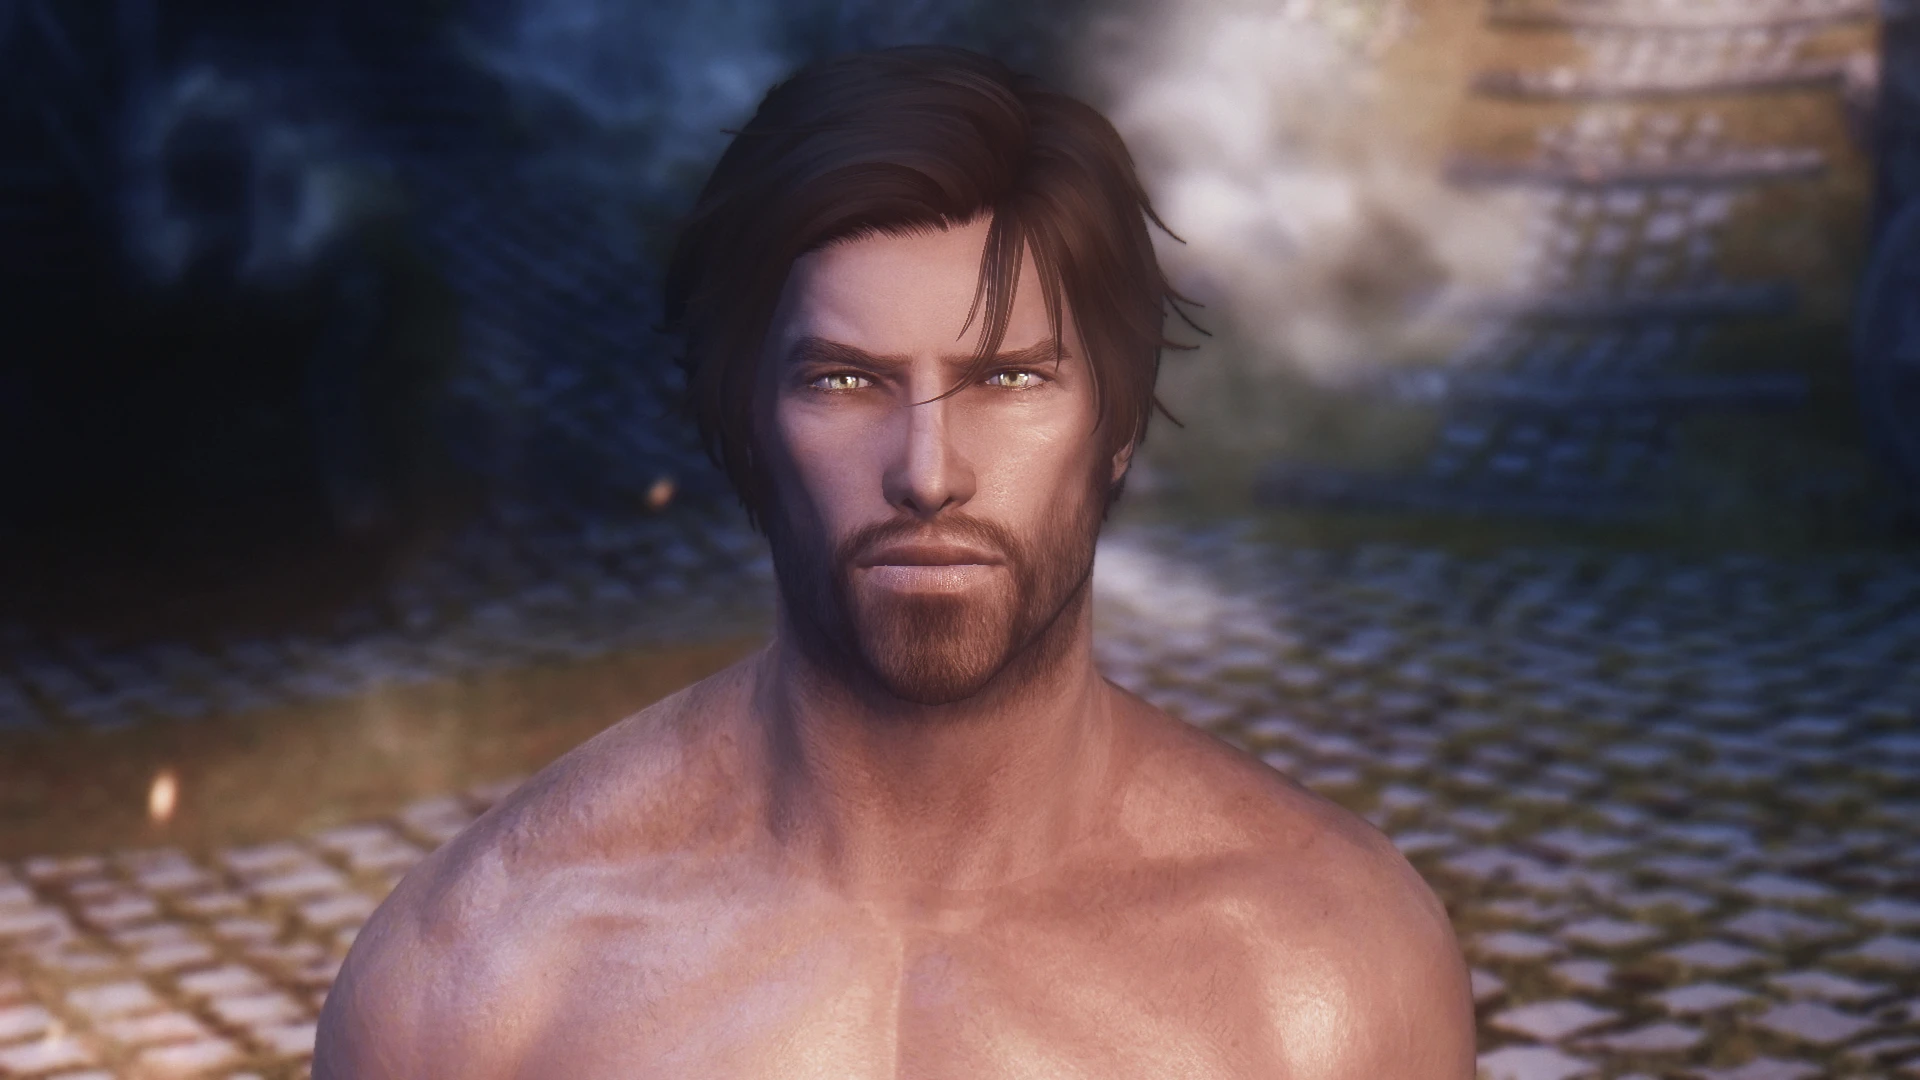 Gallery of Skyrim Hand Some Imperial Male Preset.